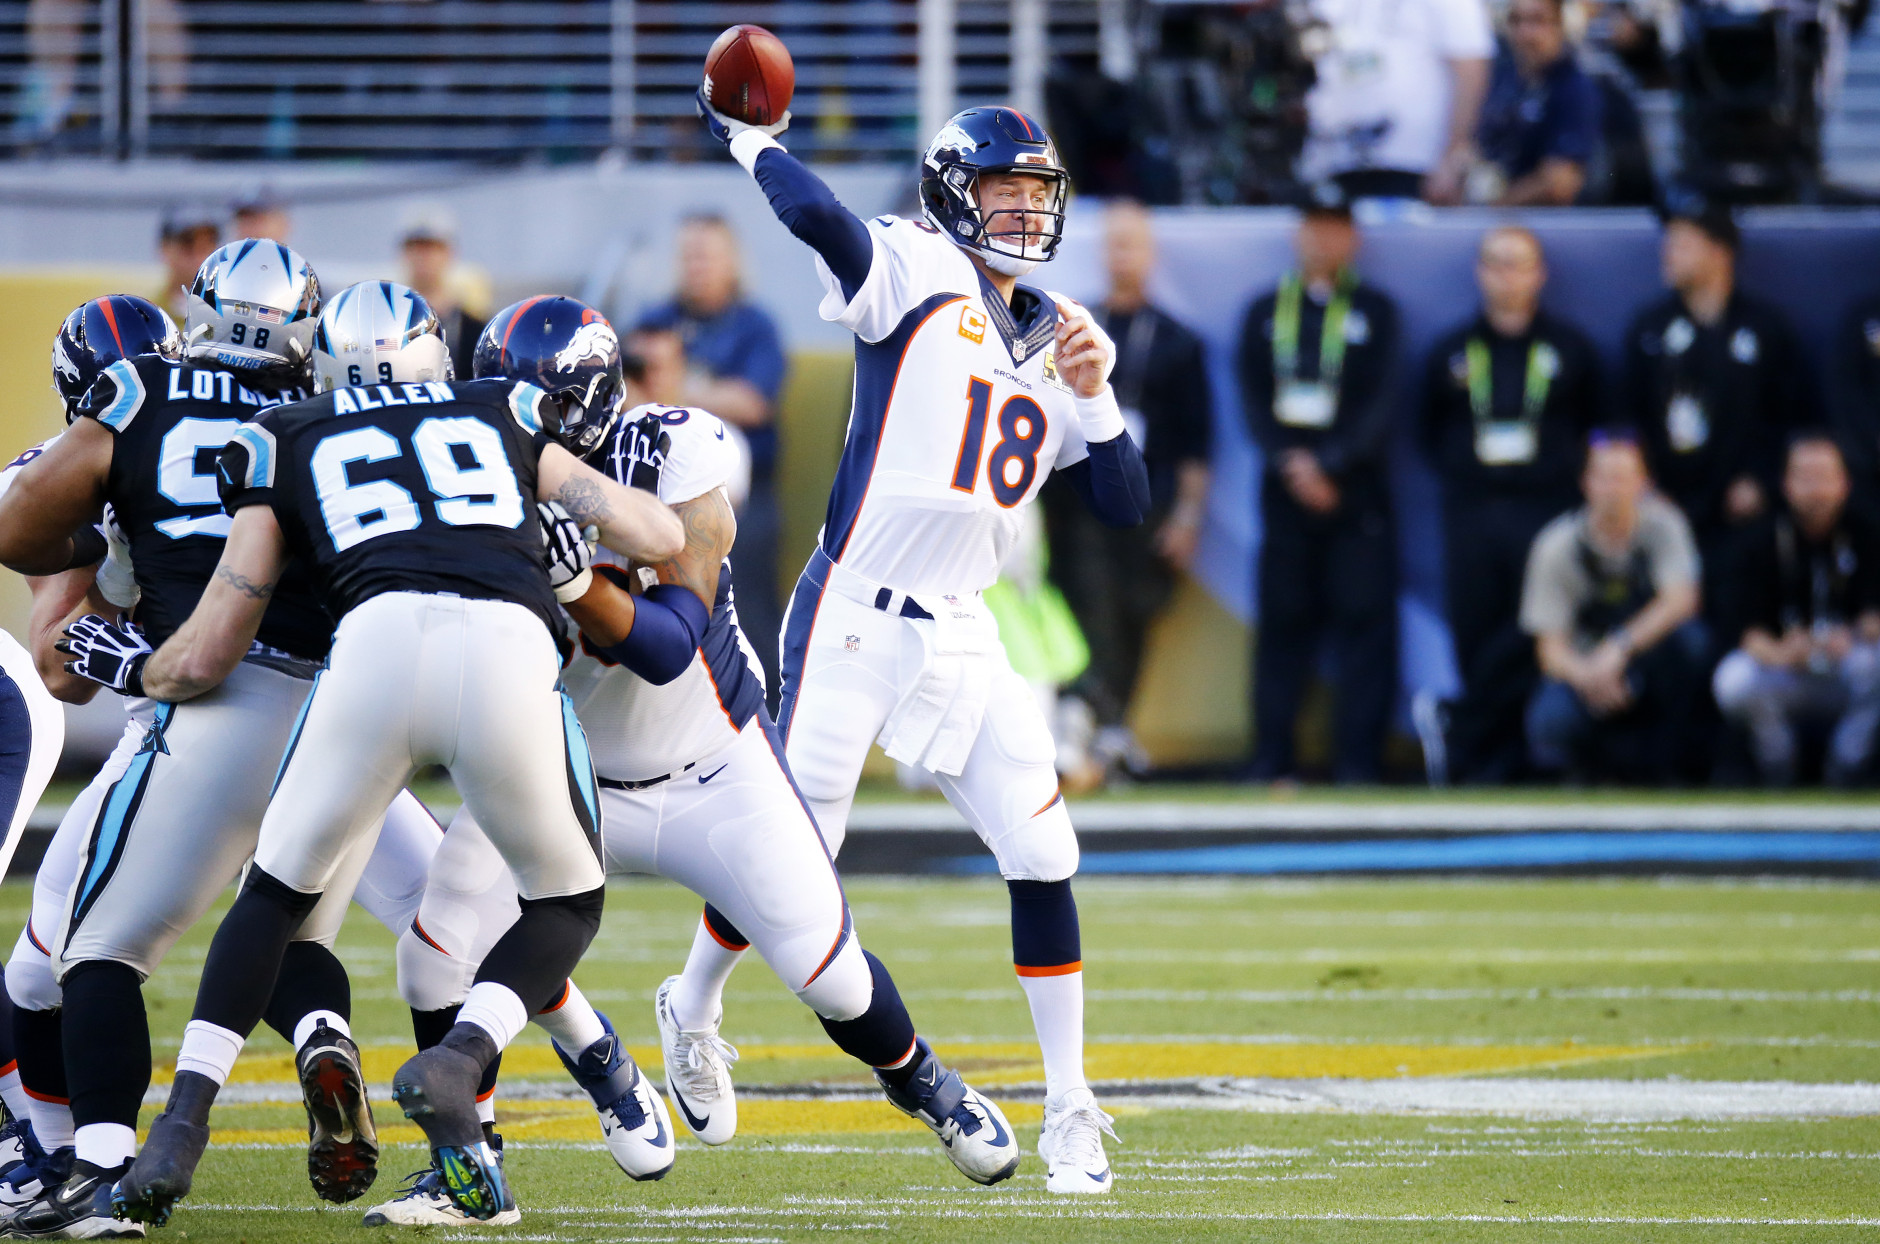 SANTA CLARA, CA - FEBRUARY 07:   Peyton Manning #18 of the Denver Broncos throws a pass against the Carolina Panthers during Super Bowl 50 at Levi's Stadium on February 7, 2016 in Santa Clara, California.  (Photo by Al Bello/Getty Images)